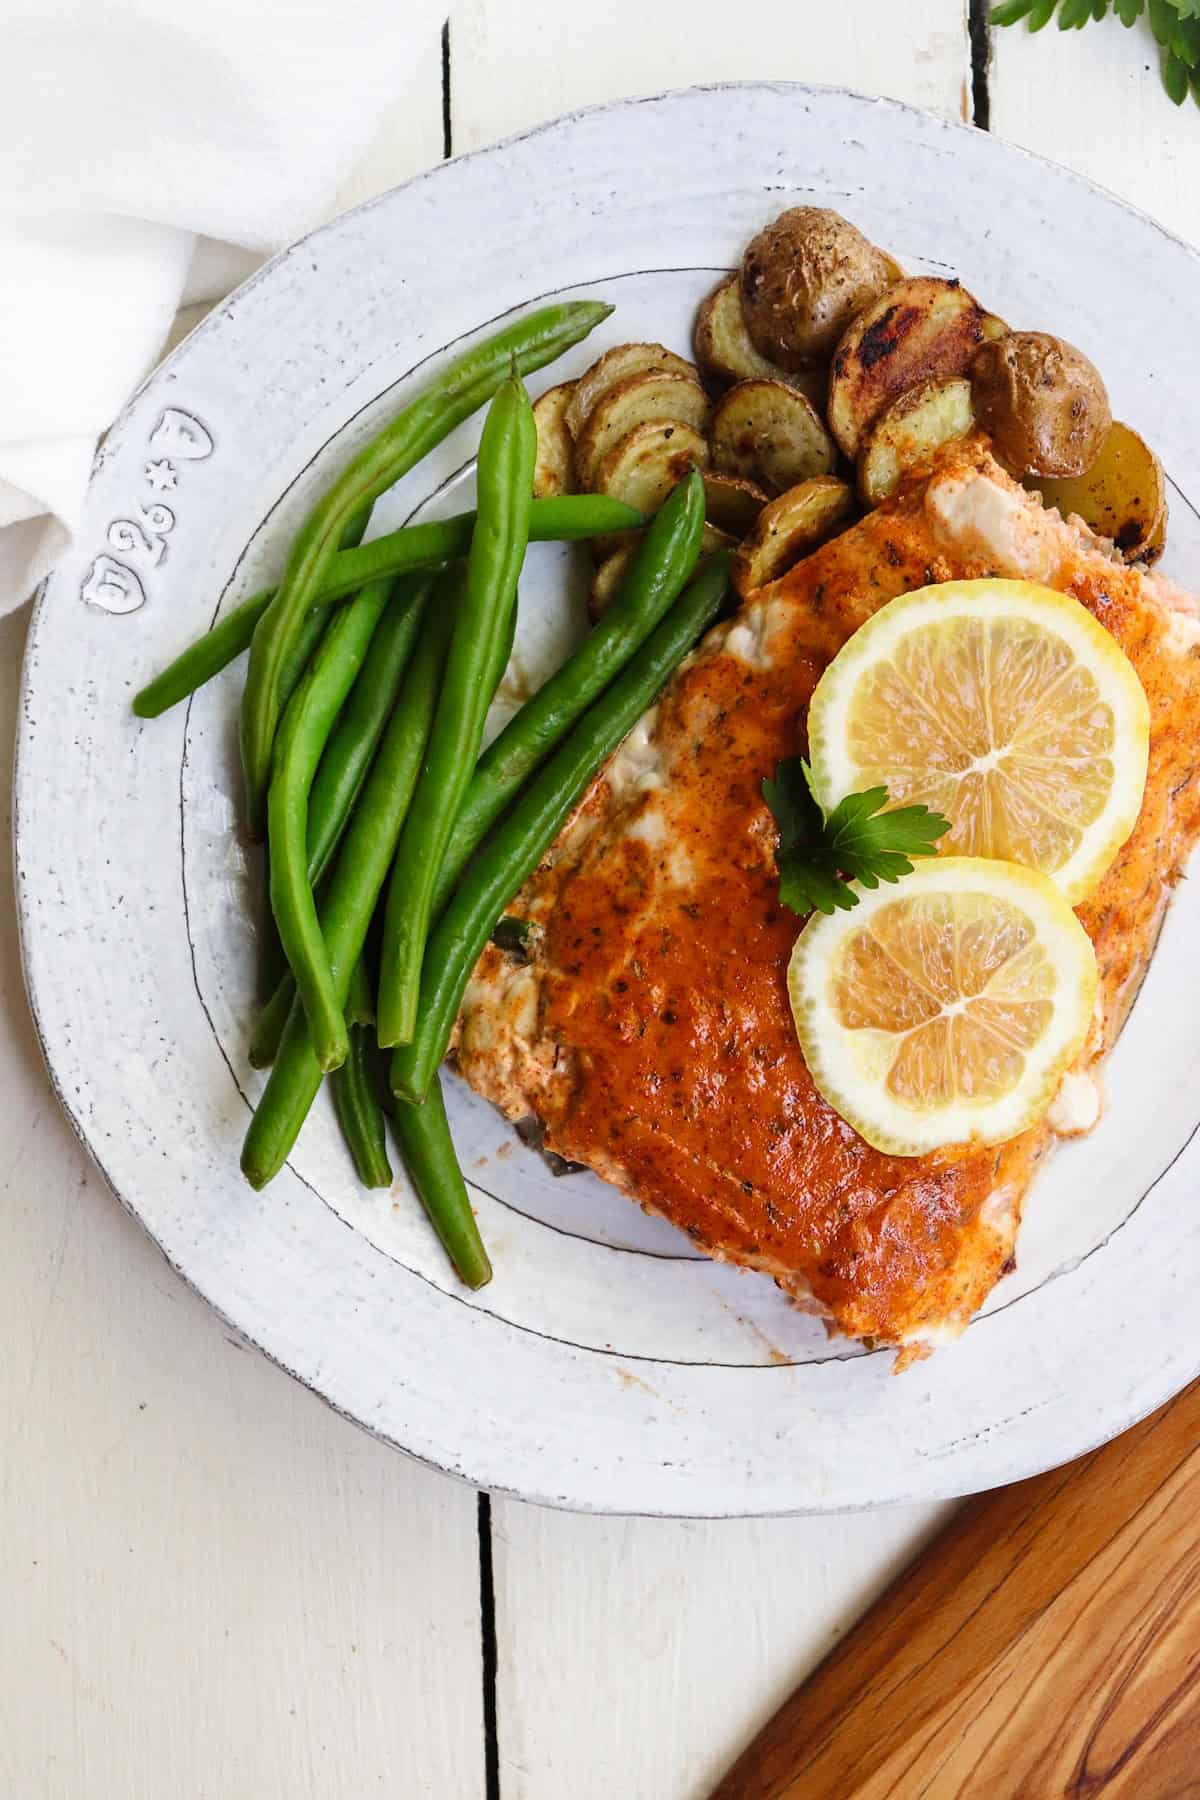 mayo baked salmon shown plated with green beans and potatoes.